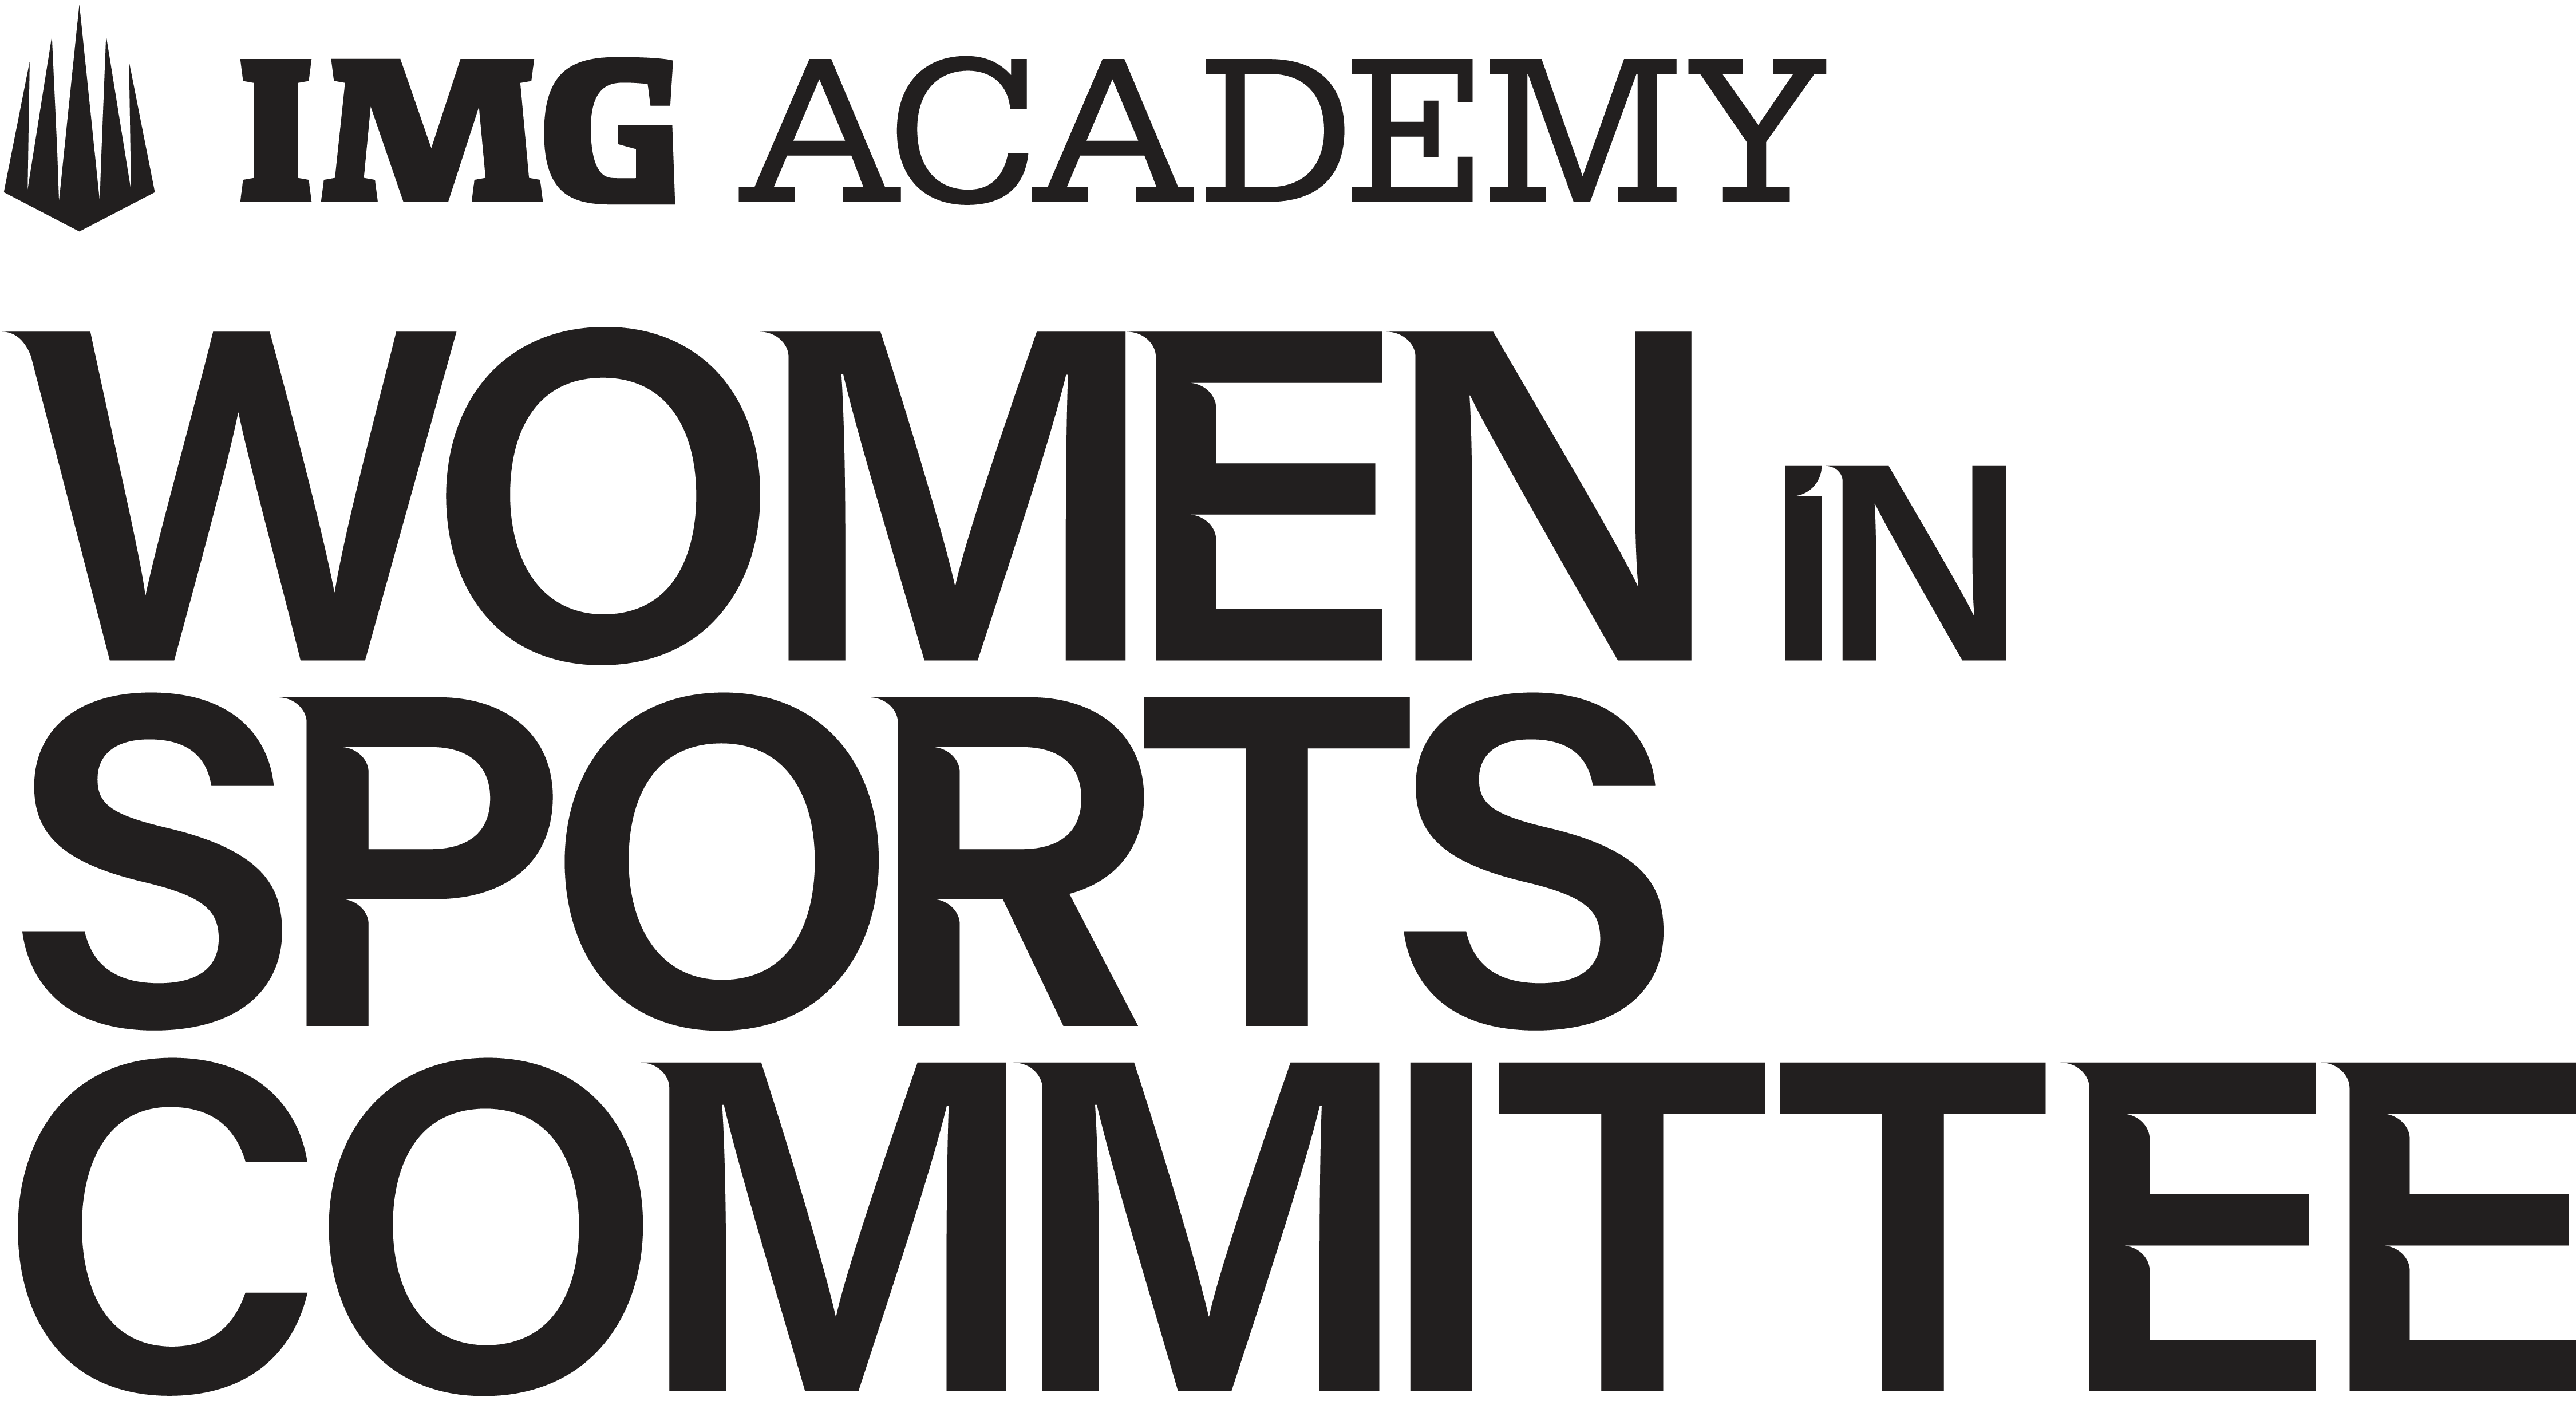 IMG Academy Women in Sports Committee